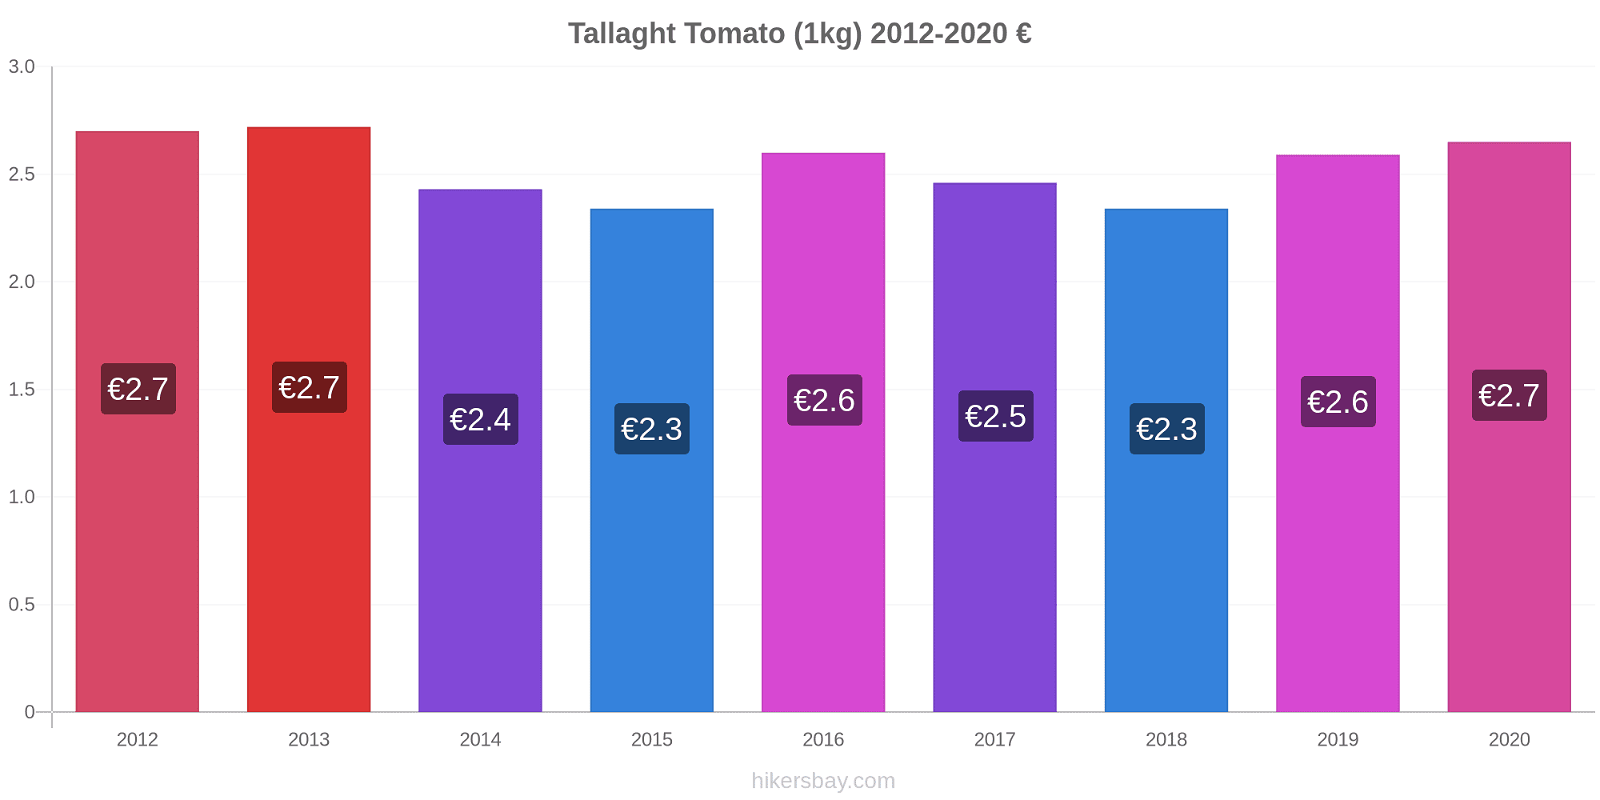 Tallaght price changes Tomato (1kg) hikersbay.com